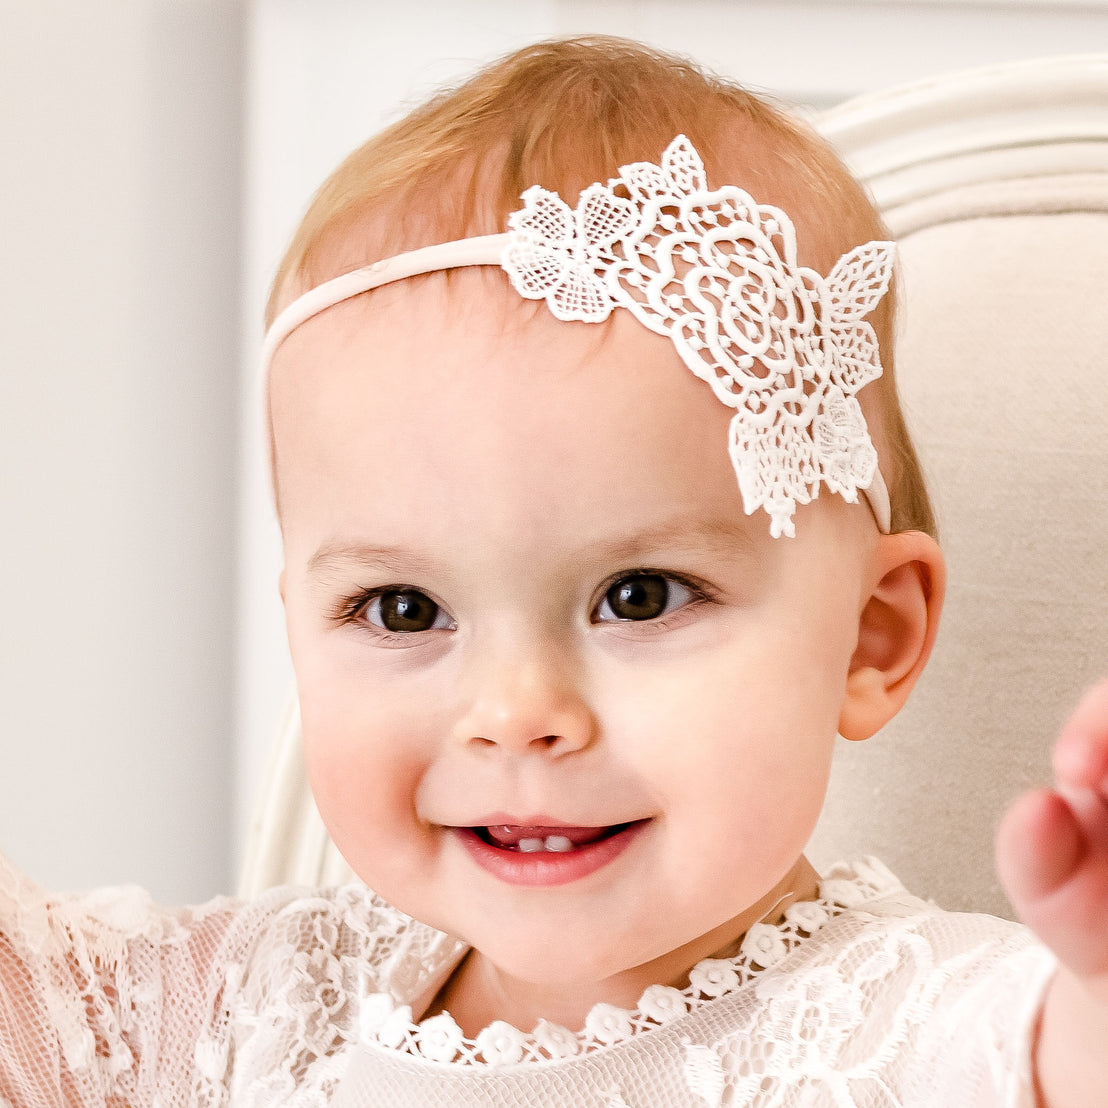 A smiling baby wearing a Juliette Lace Headband, sitting in a chair and reaching out toward the camera.